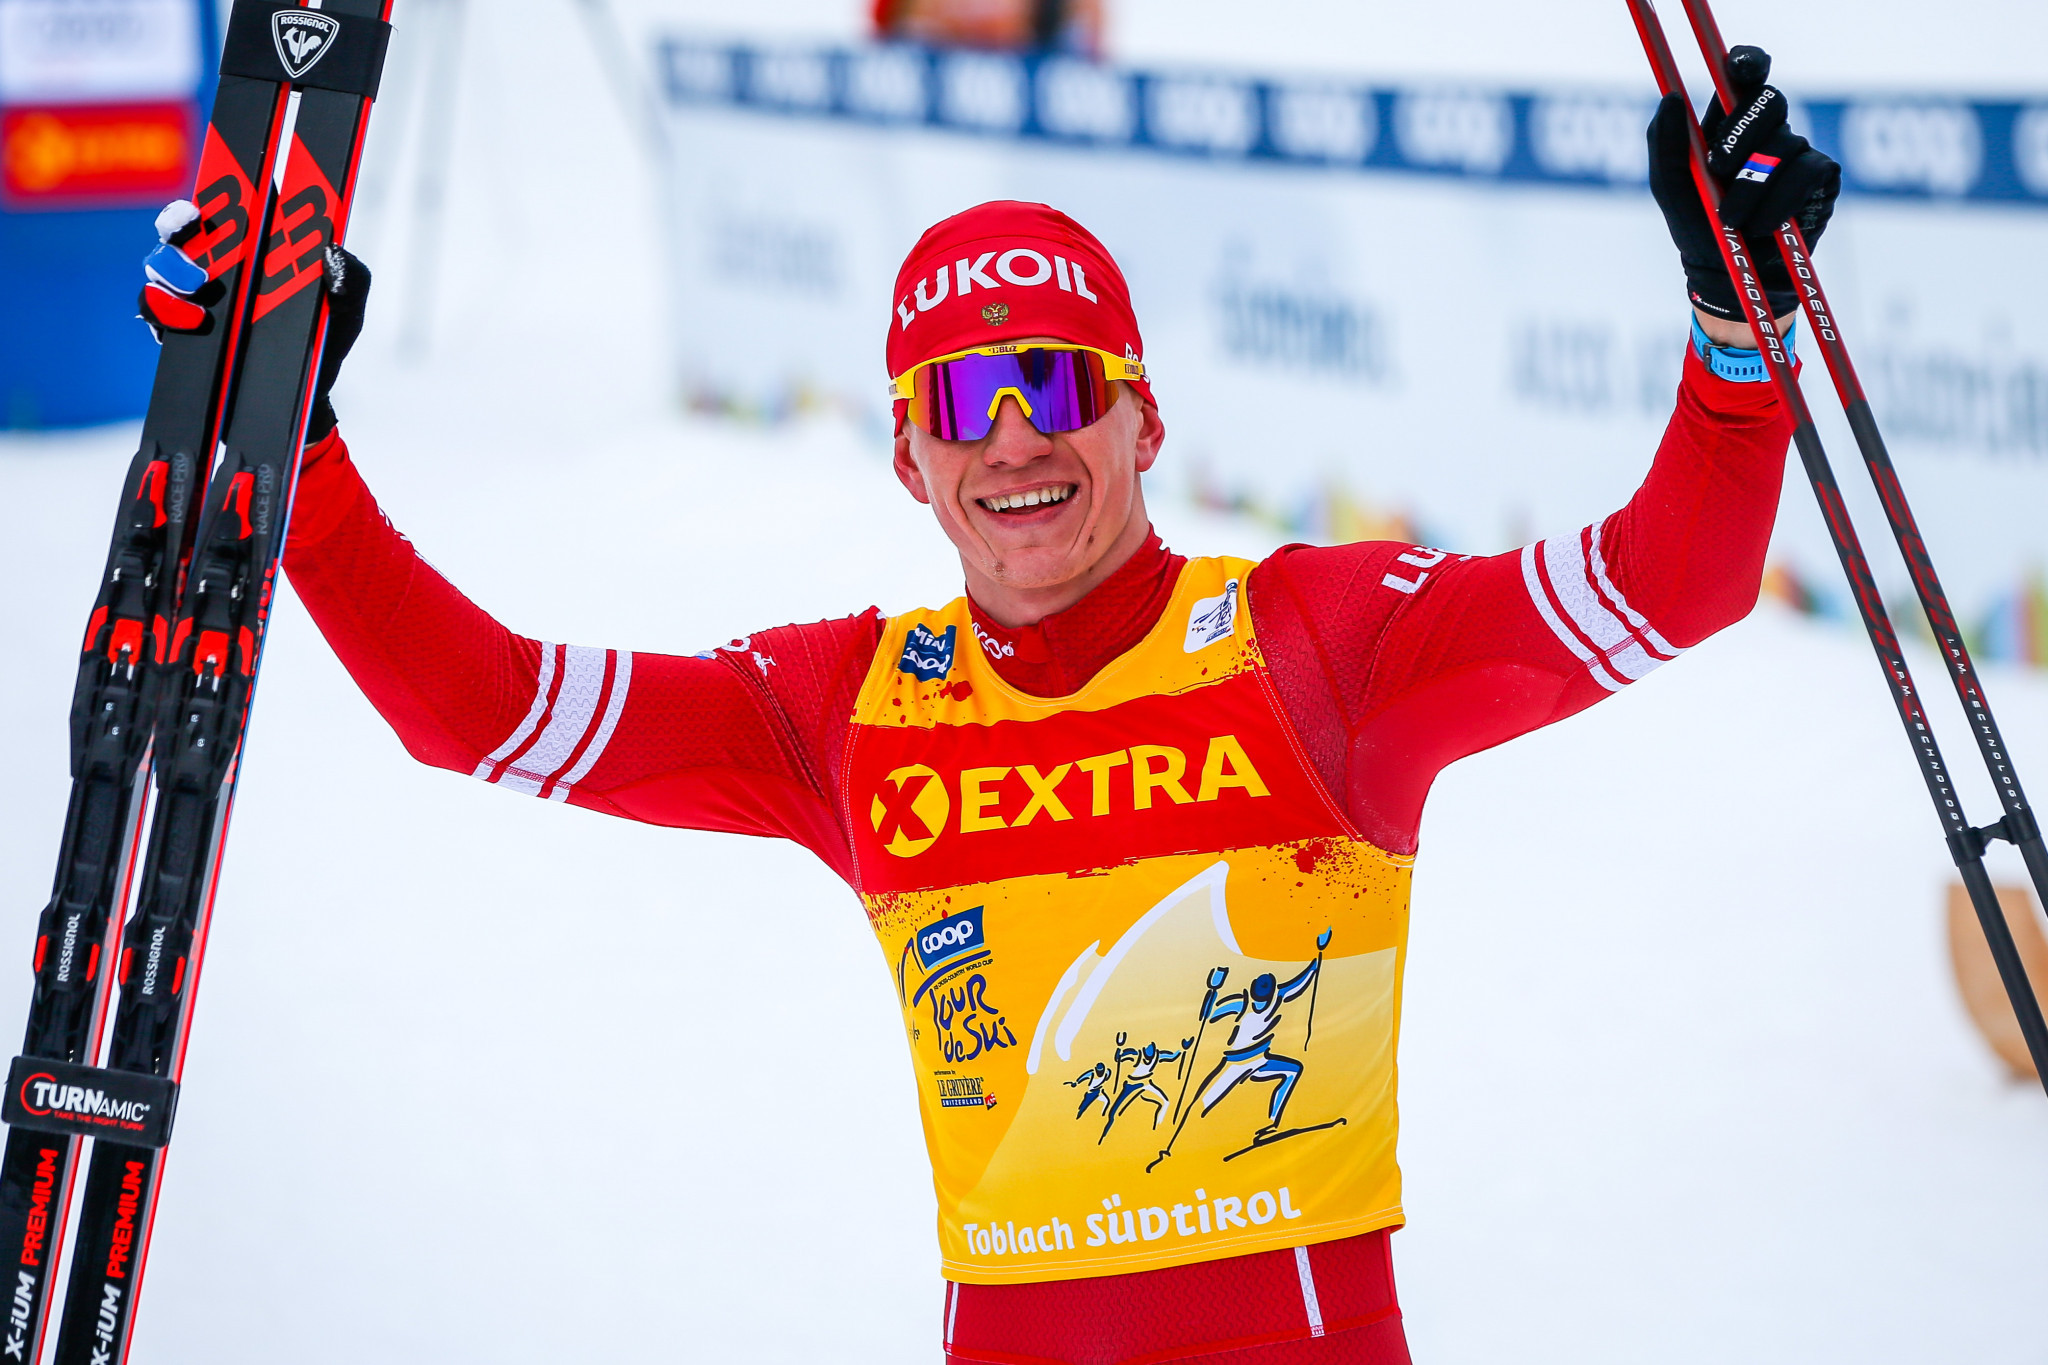 Alexander Bolshunov has won the past four races to give him a healthy lead in the Tour de Ski ©Getty Images